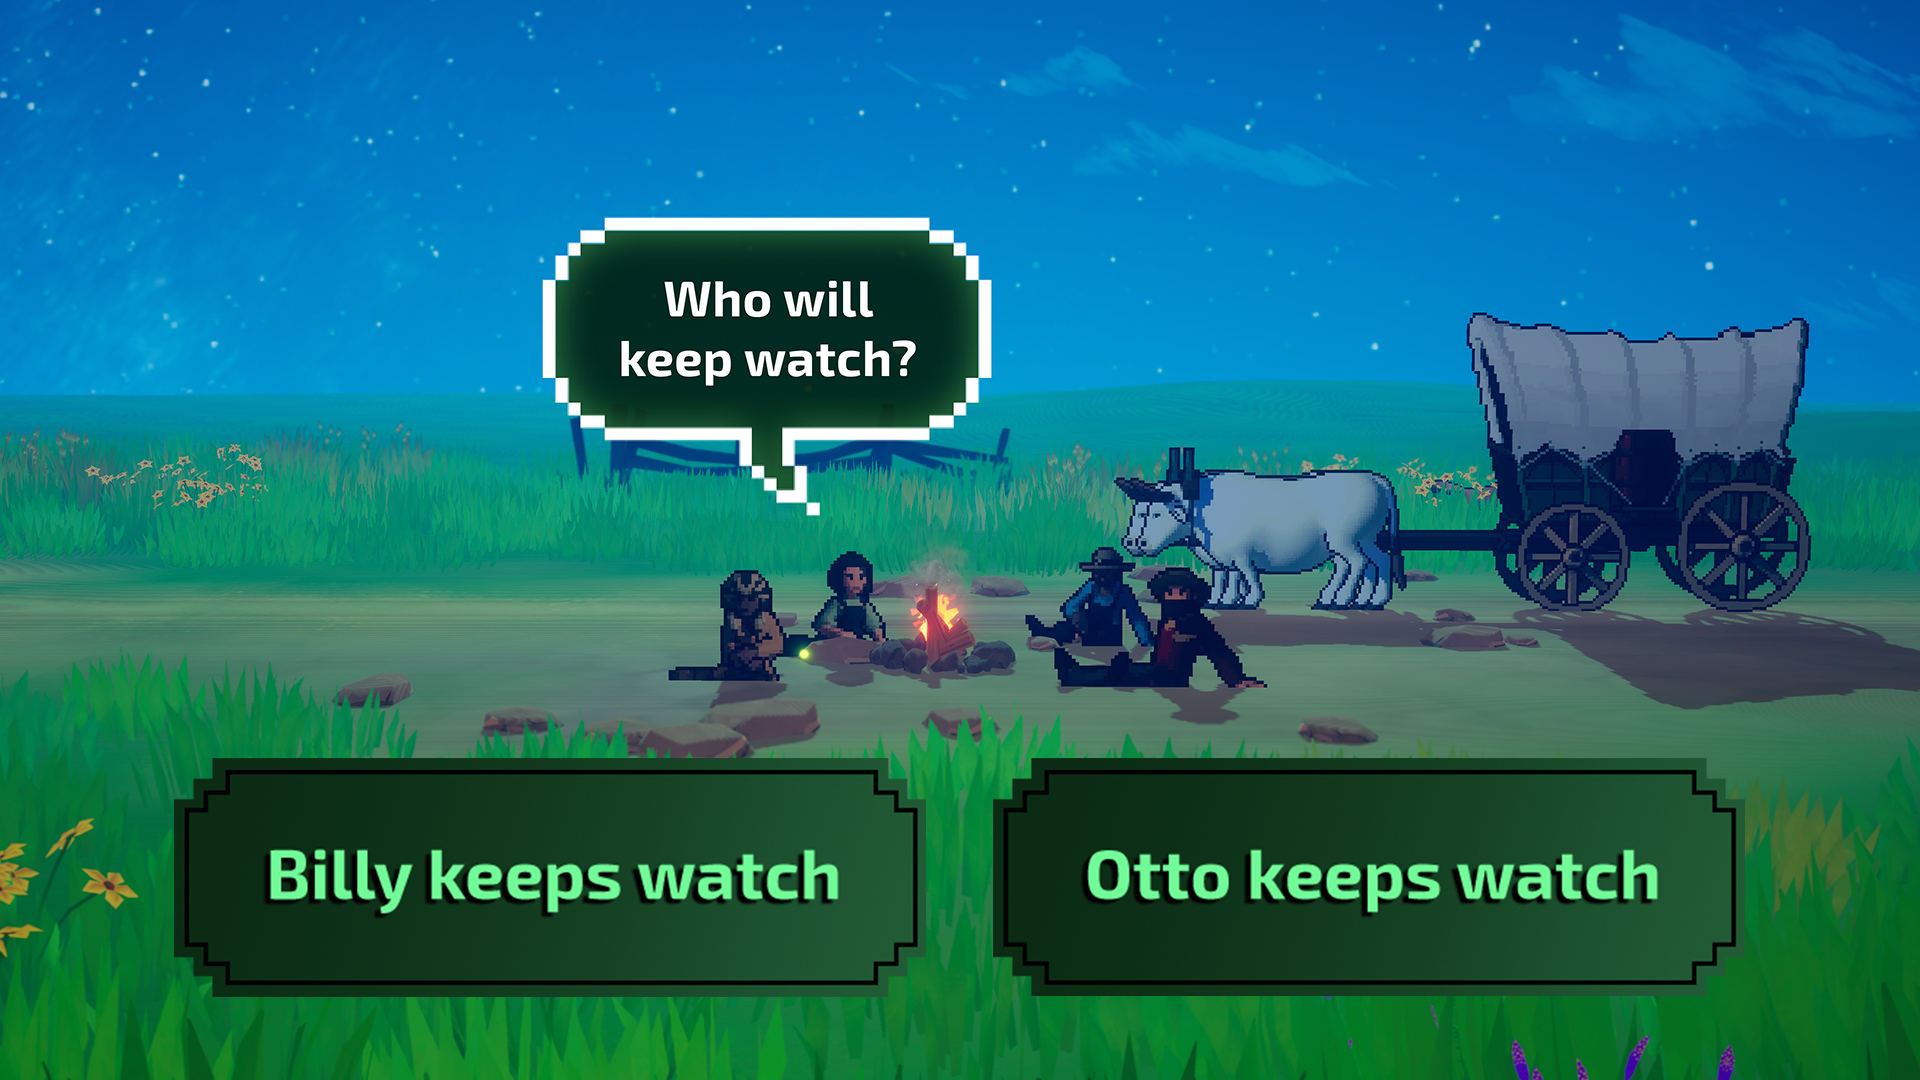 The wagon party sits around the campfire, as someone asks, &quot;Who will keep watch?&quot; The two choices are: Billy keeps watch and Otto keeps watch